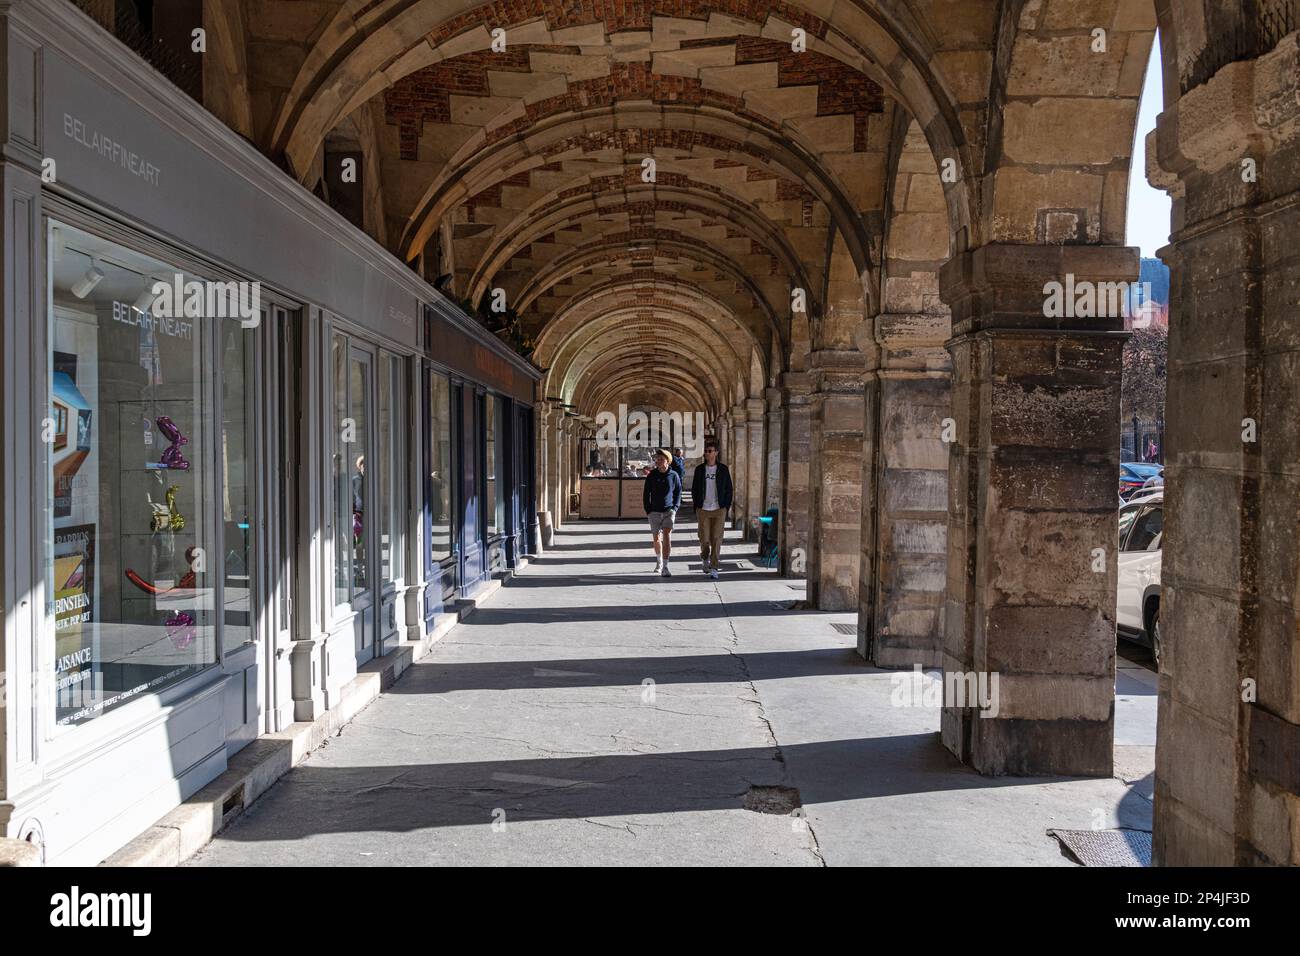 A tunnel of arches around the North Side of The Place Des Vosges, Marais, Paris. Stock Photo